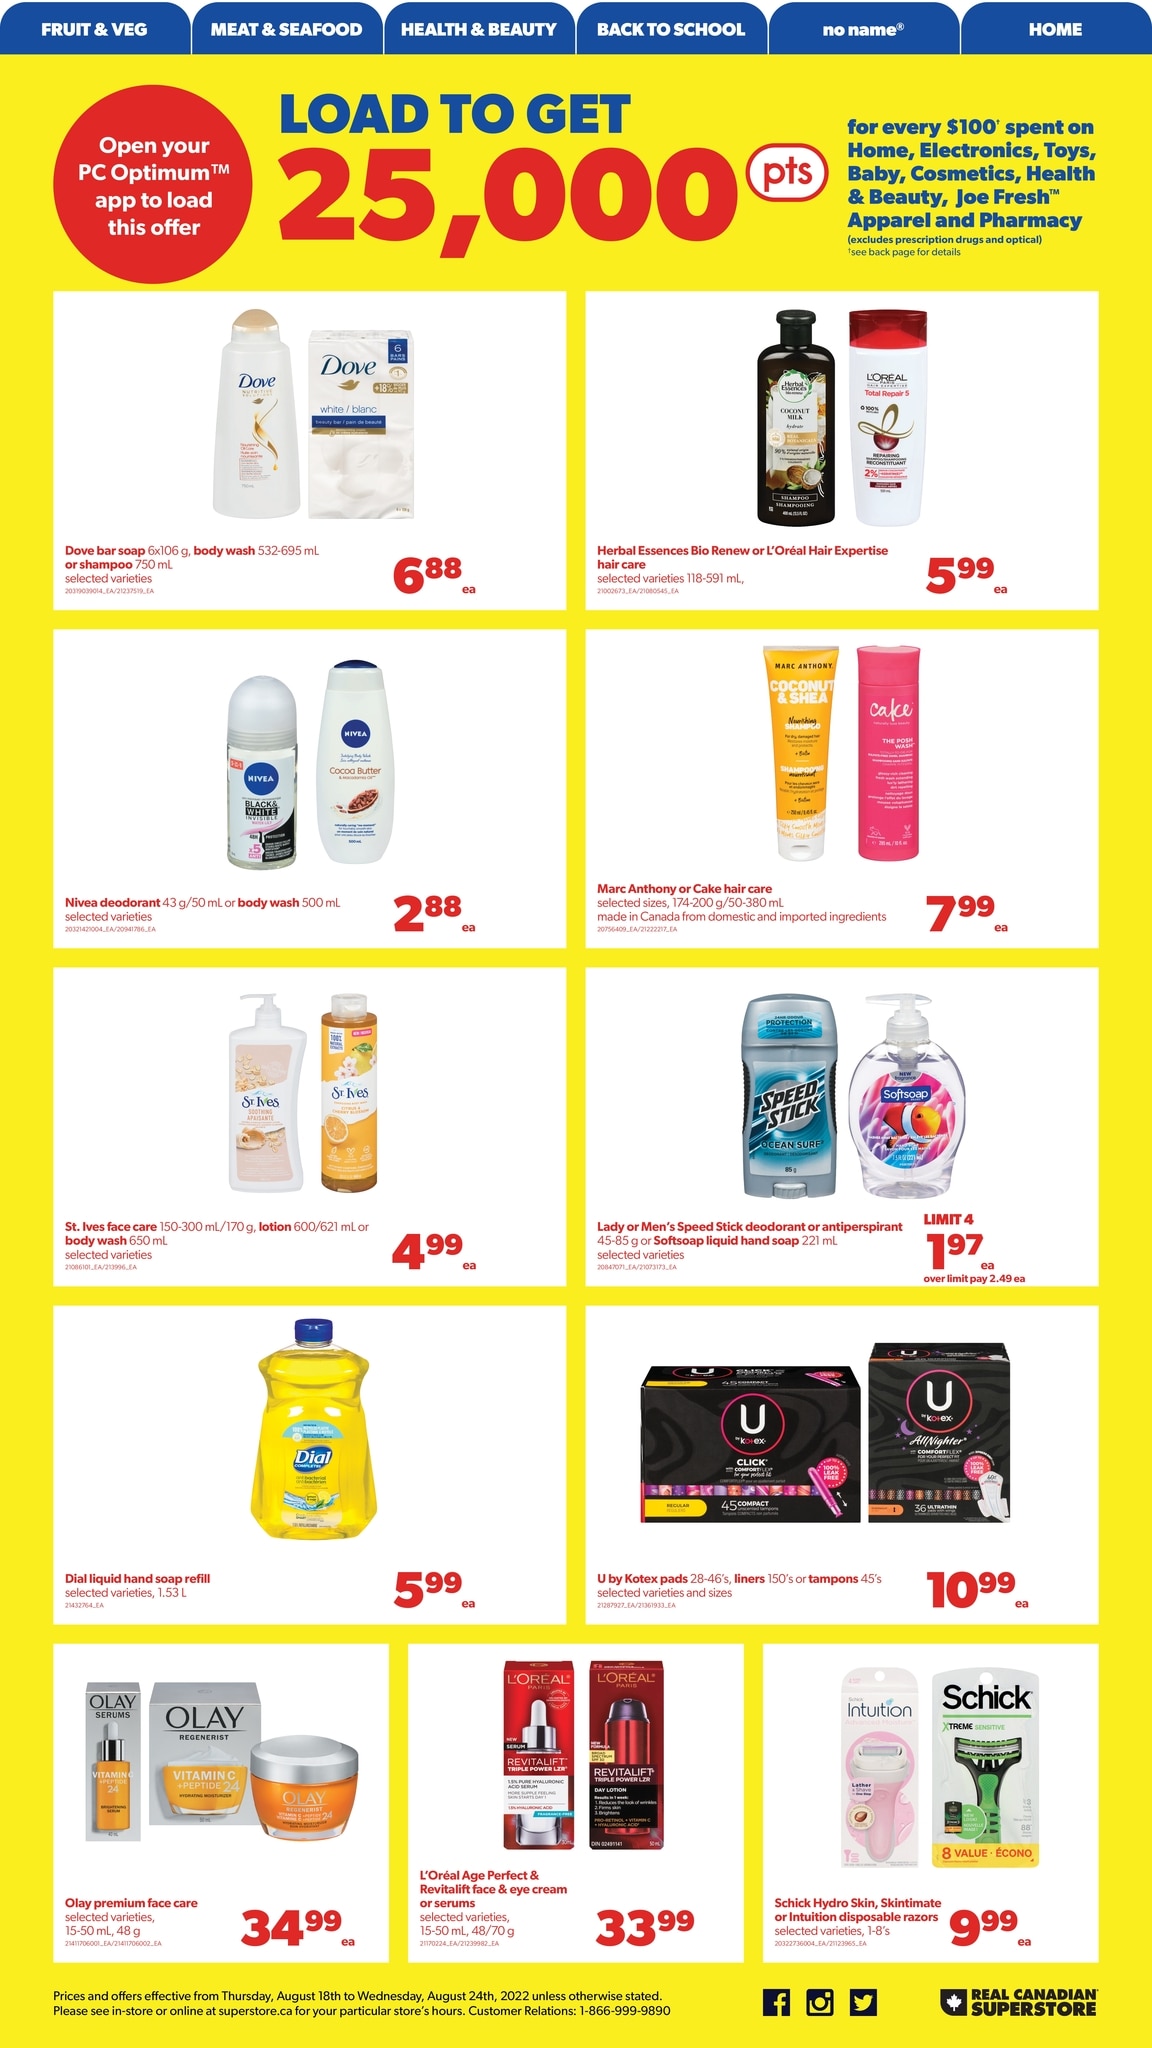 Real Canadian Superstore Western Canada - Weekly Flyer Specials - Page 22